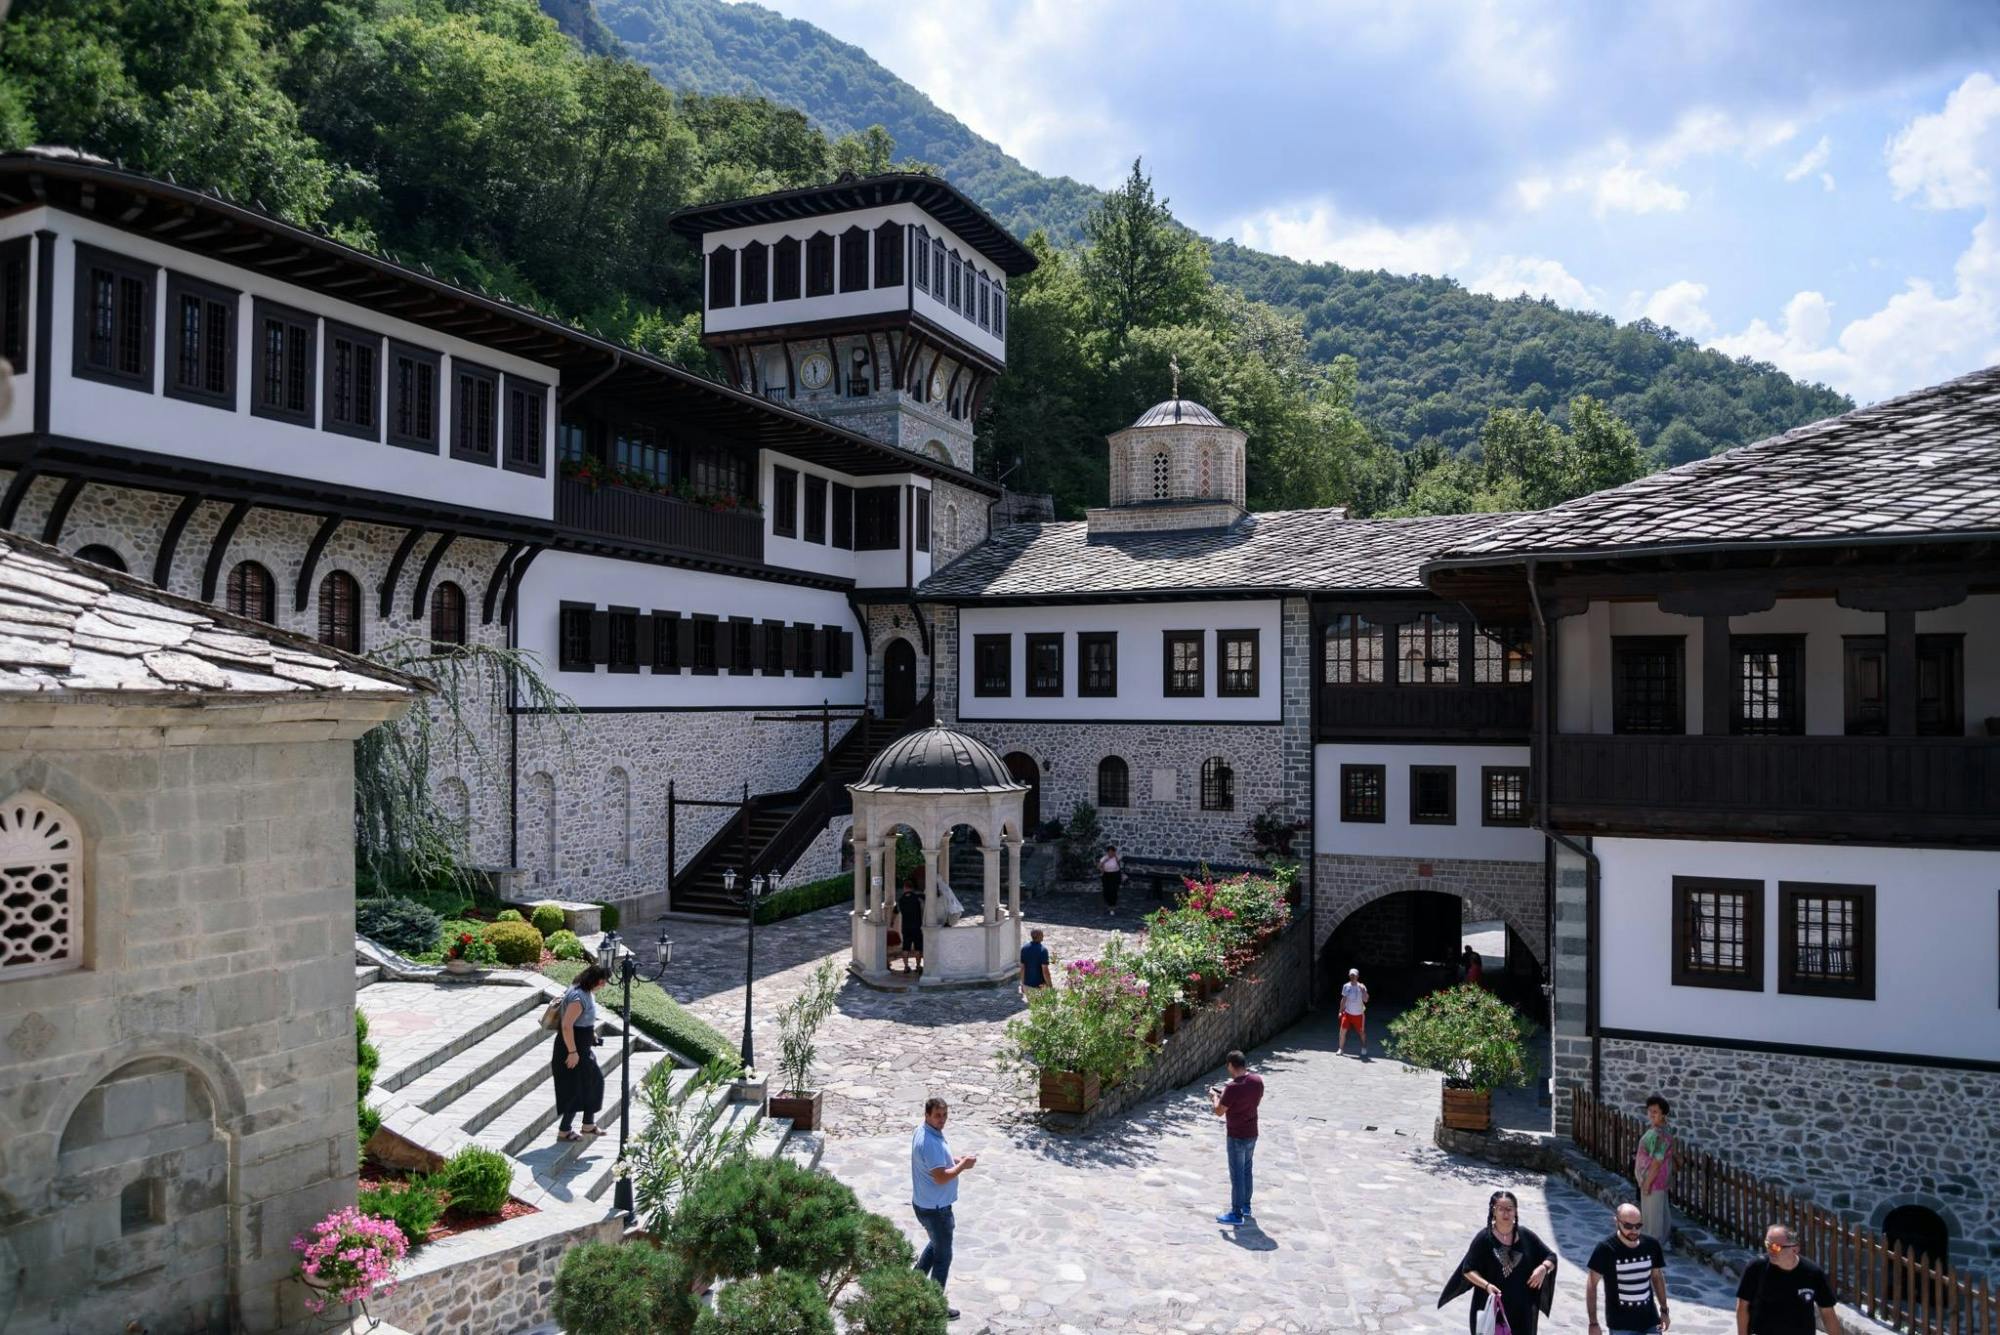 Bigorski Monastery tickets and guided visit Musement